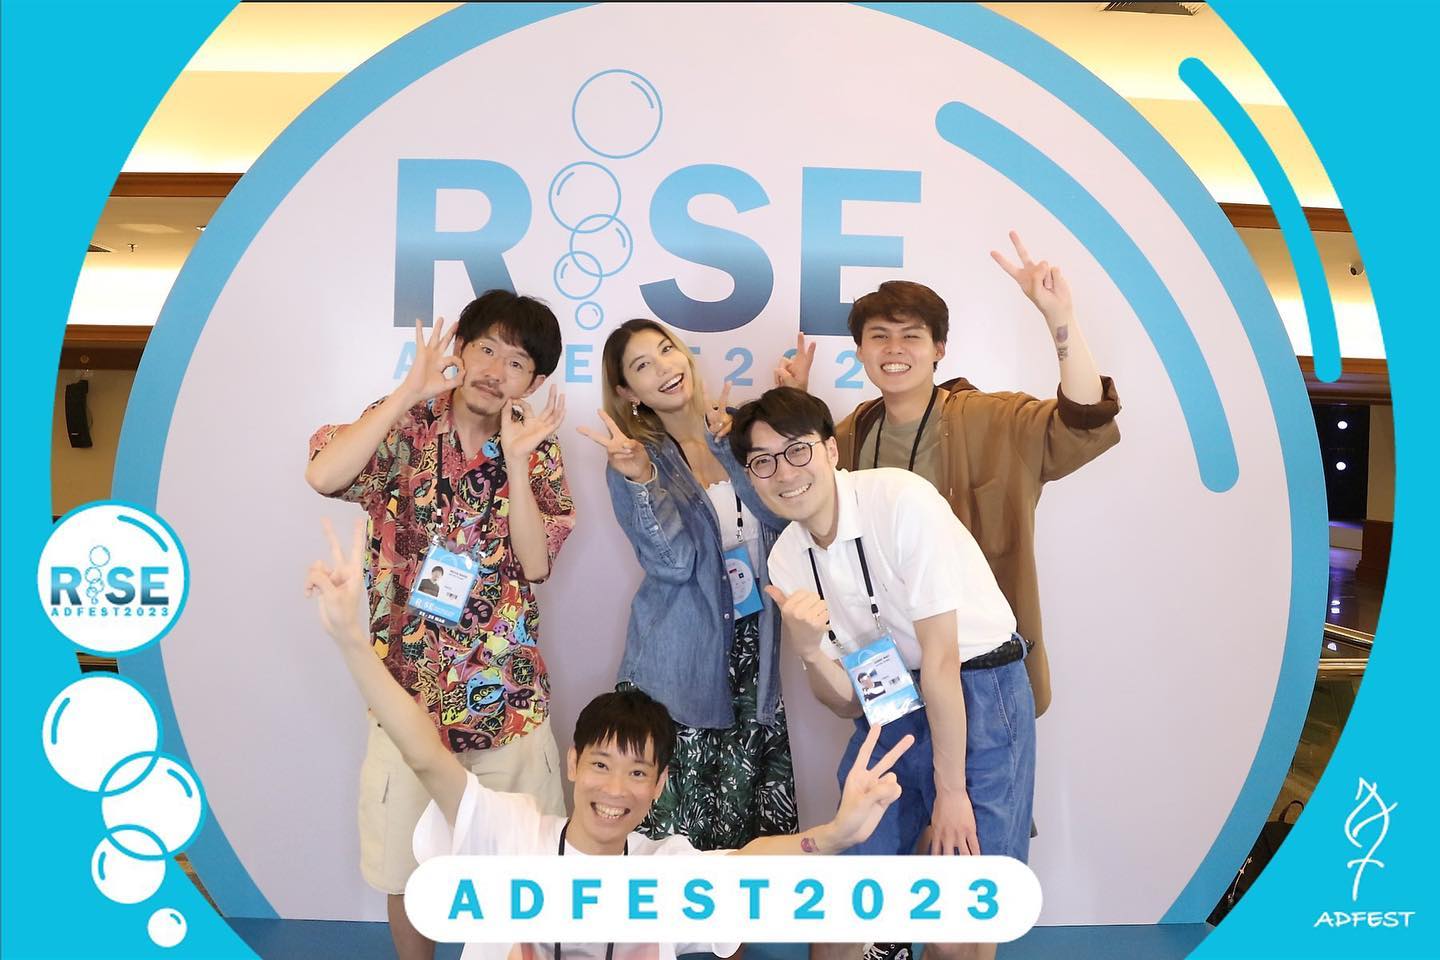 -
ADFEST 2023 was a blast!

Thank you so much to everyone who took the time to meet our team
We really enjoyed talking to everyone!

Excited see you again for hopefully, an opportunity to collaborate on a future project.